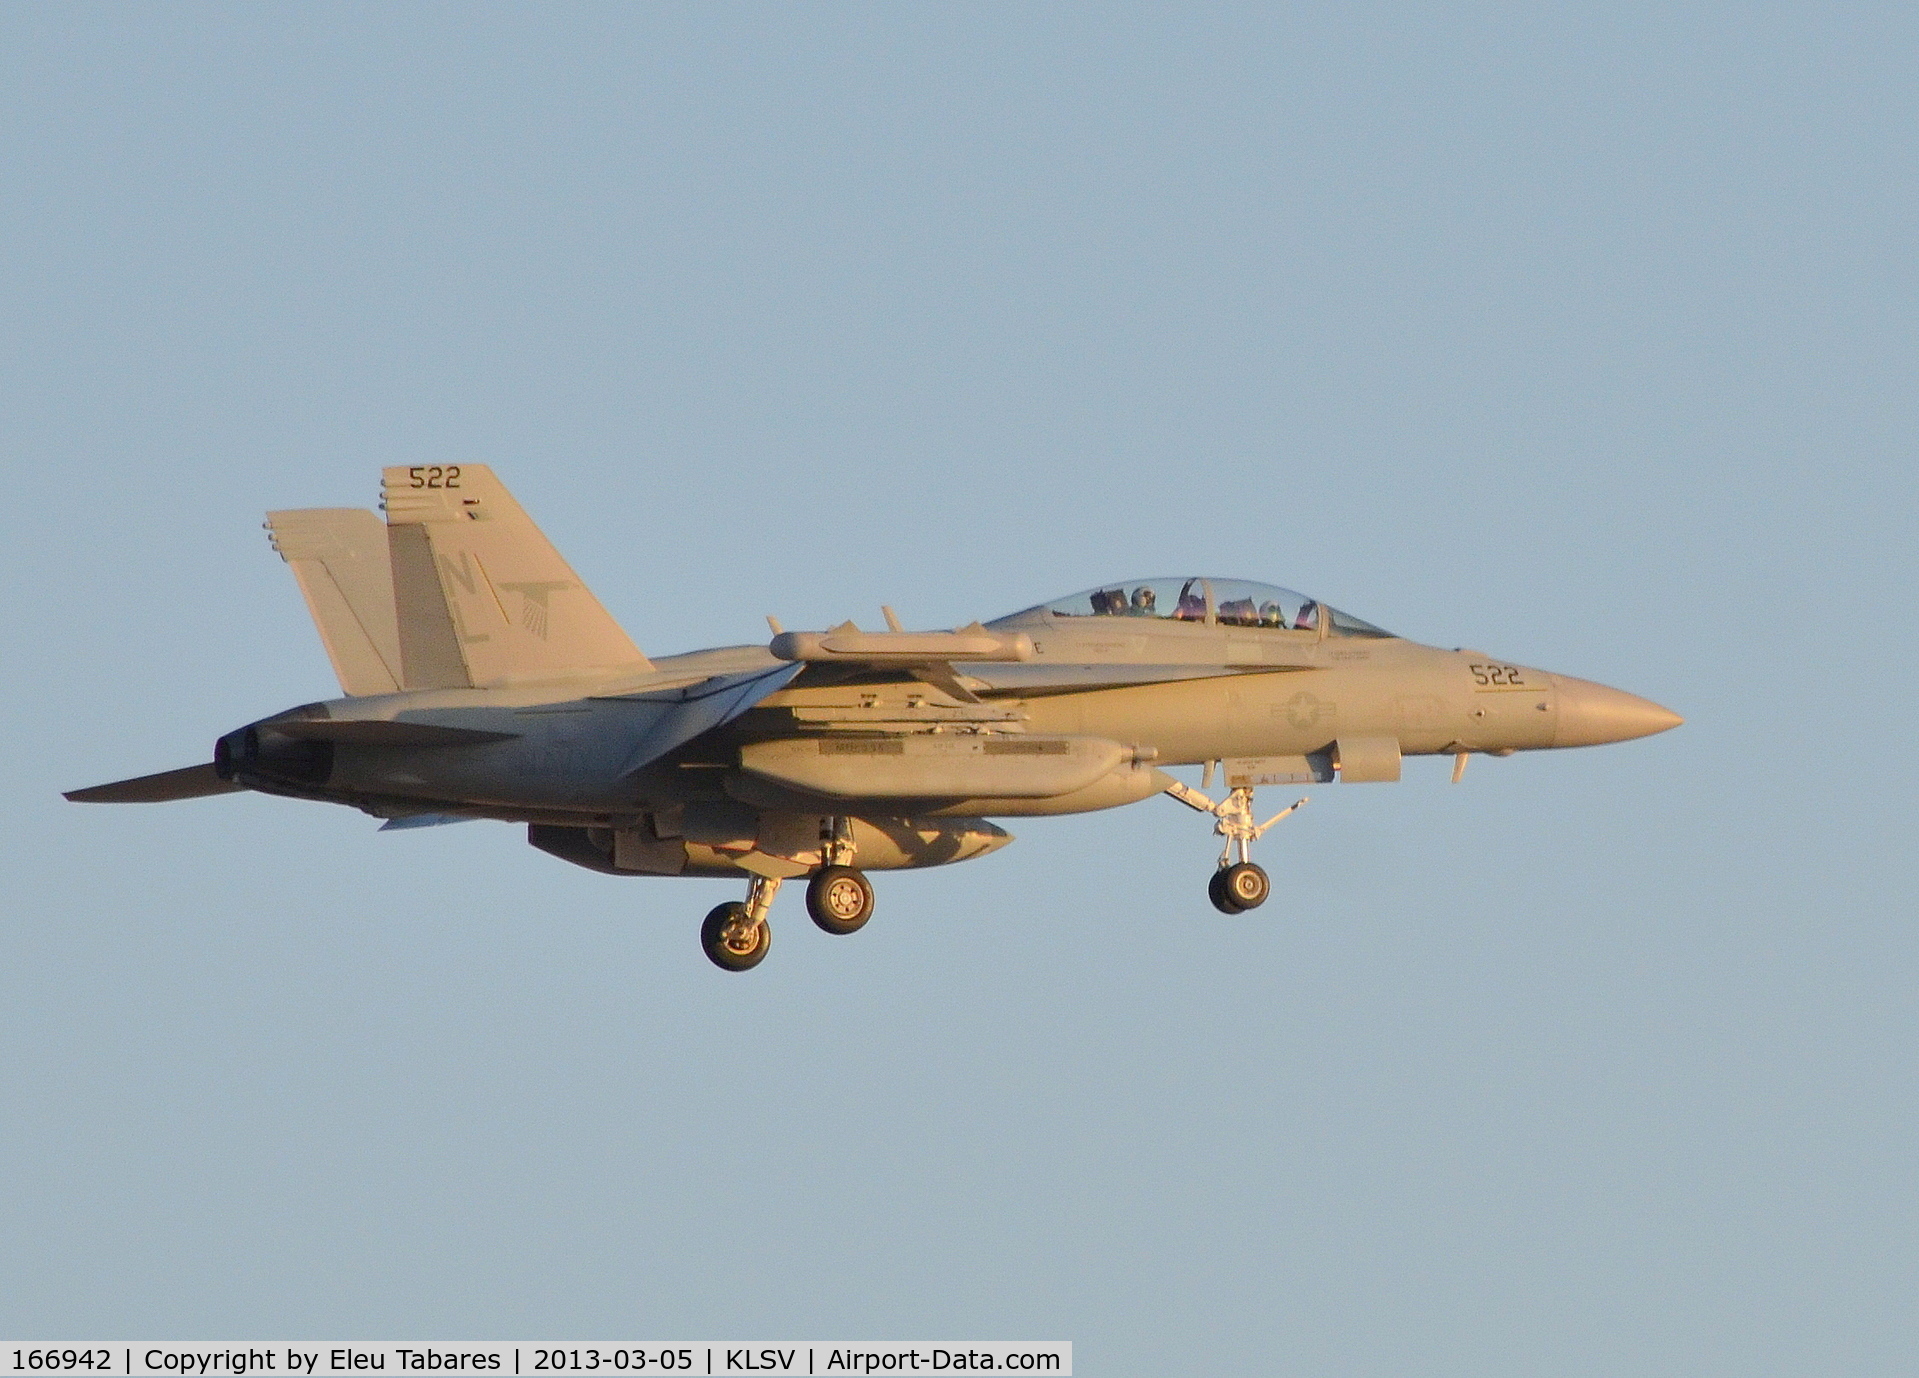 166942, Boeing EA-18G Growler C/N G-27, Taken during Red Flag Exercise at Nellis Air Force Base, Nevada.